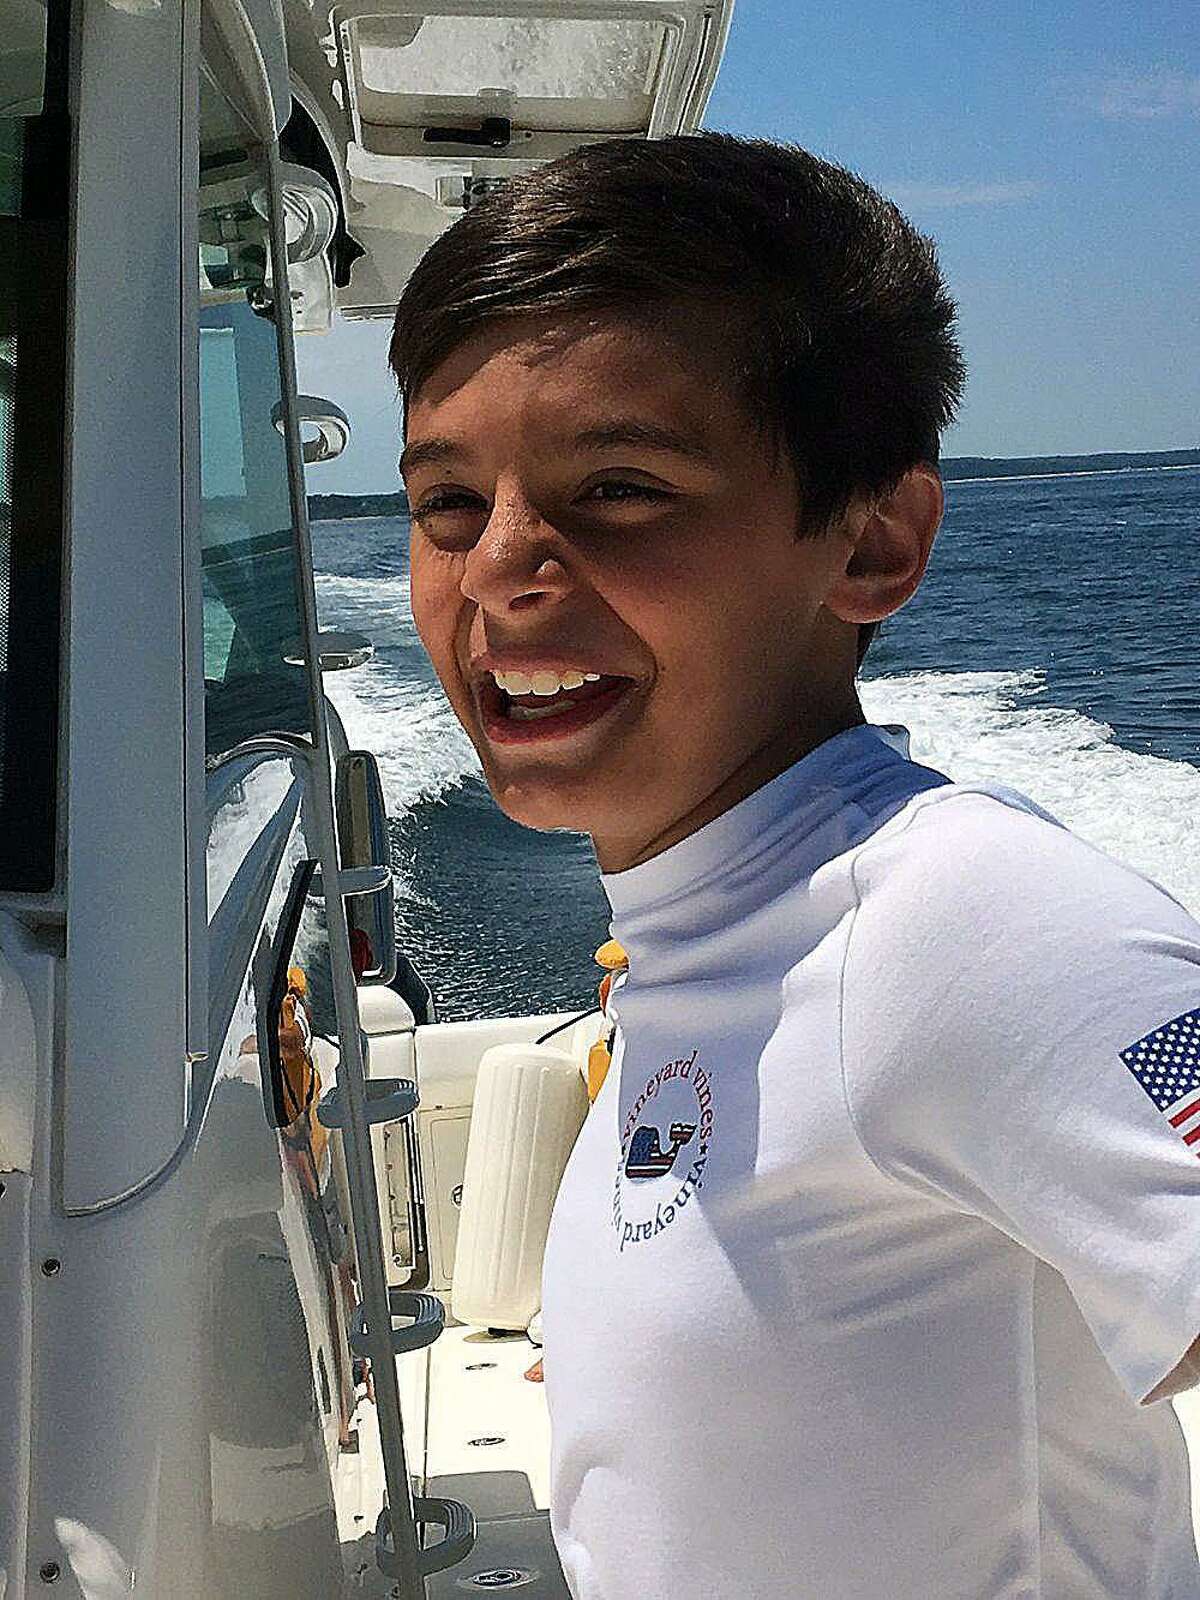 Nico Mallozzi, 10, died Sunday from complications of the flu.